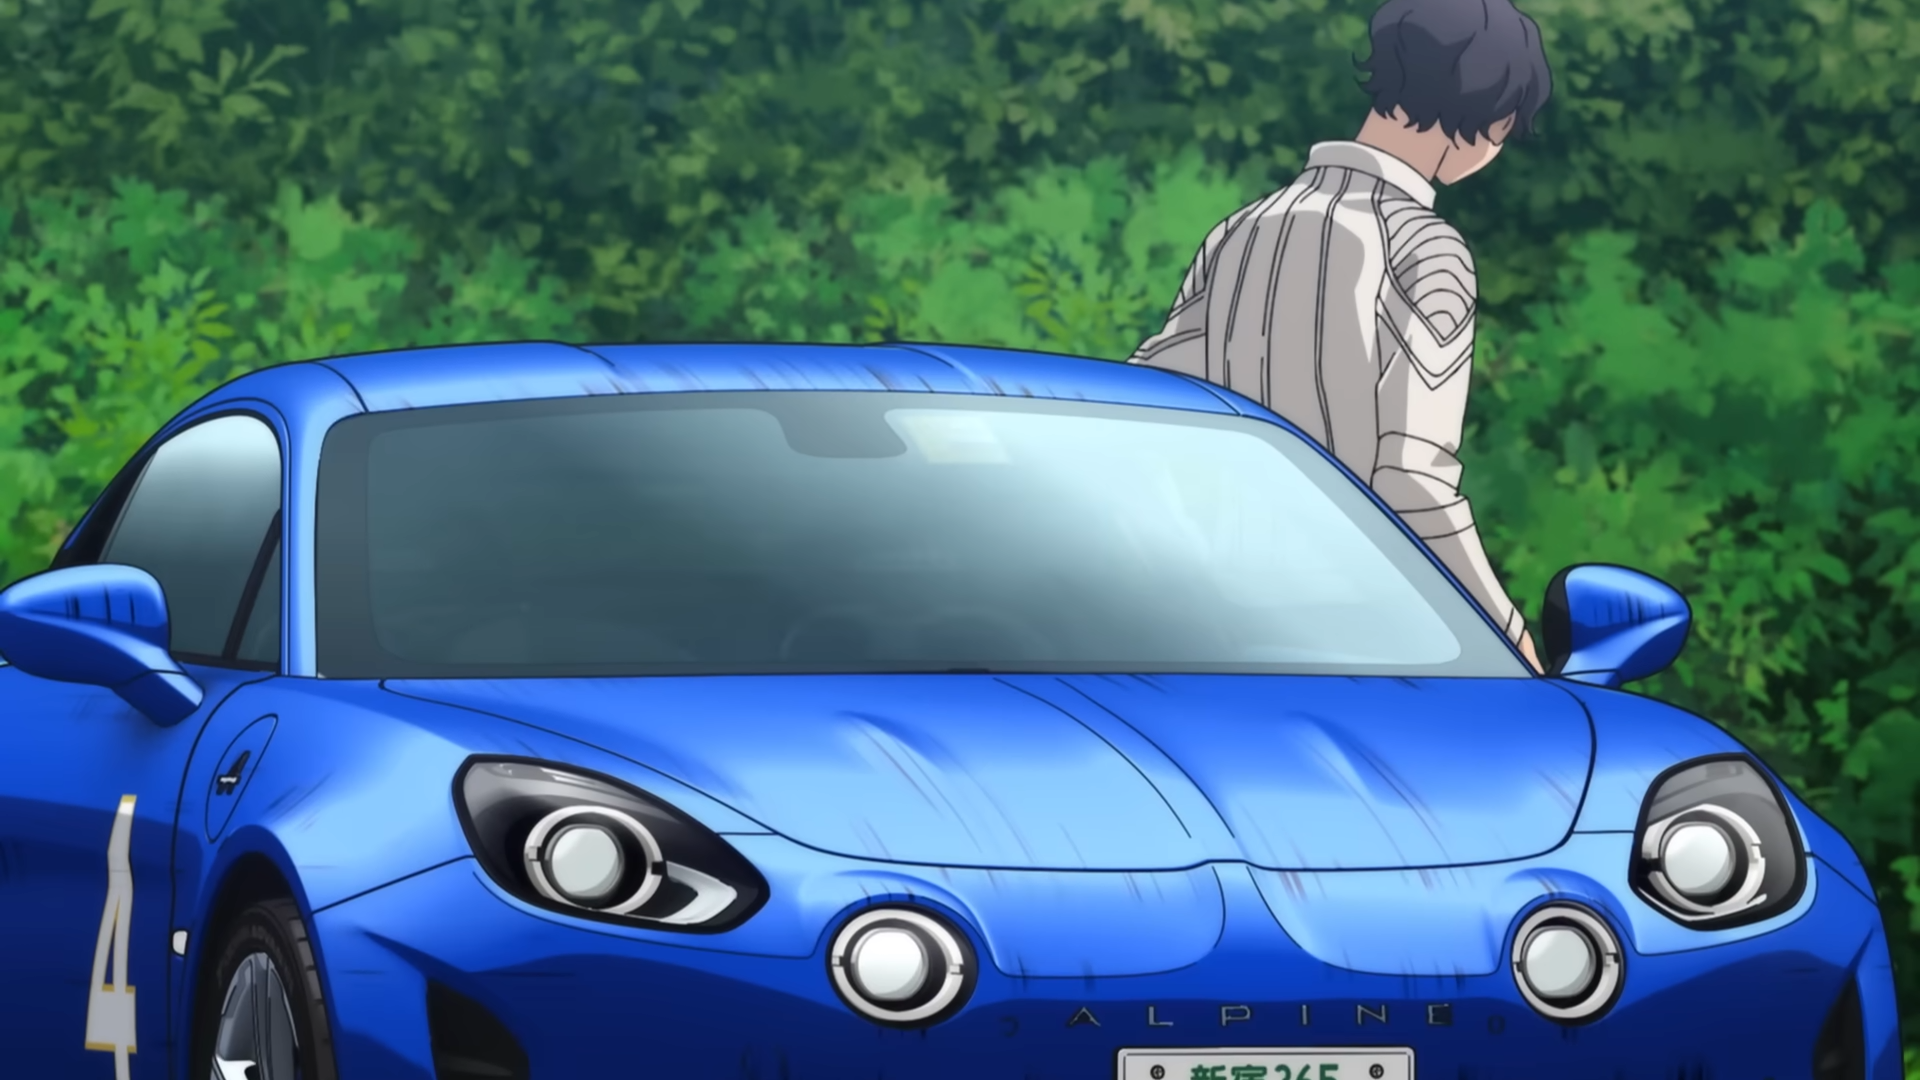 Initial D's MF Ghost Release Date, Characters And Plot - What We Know So Far